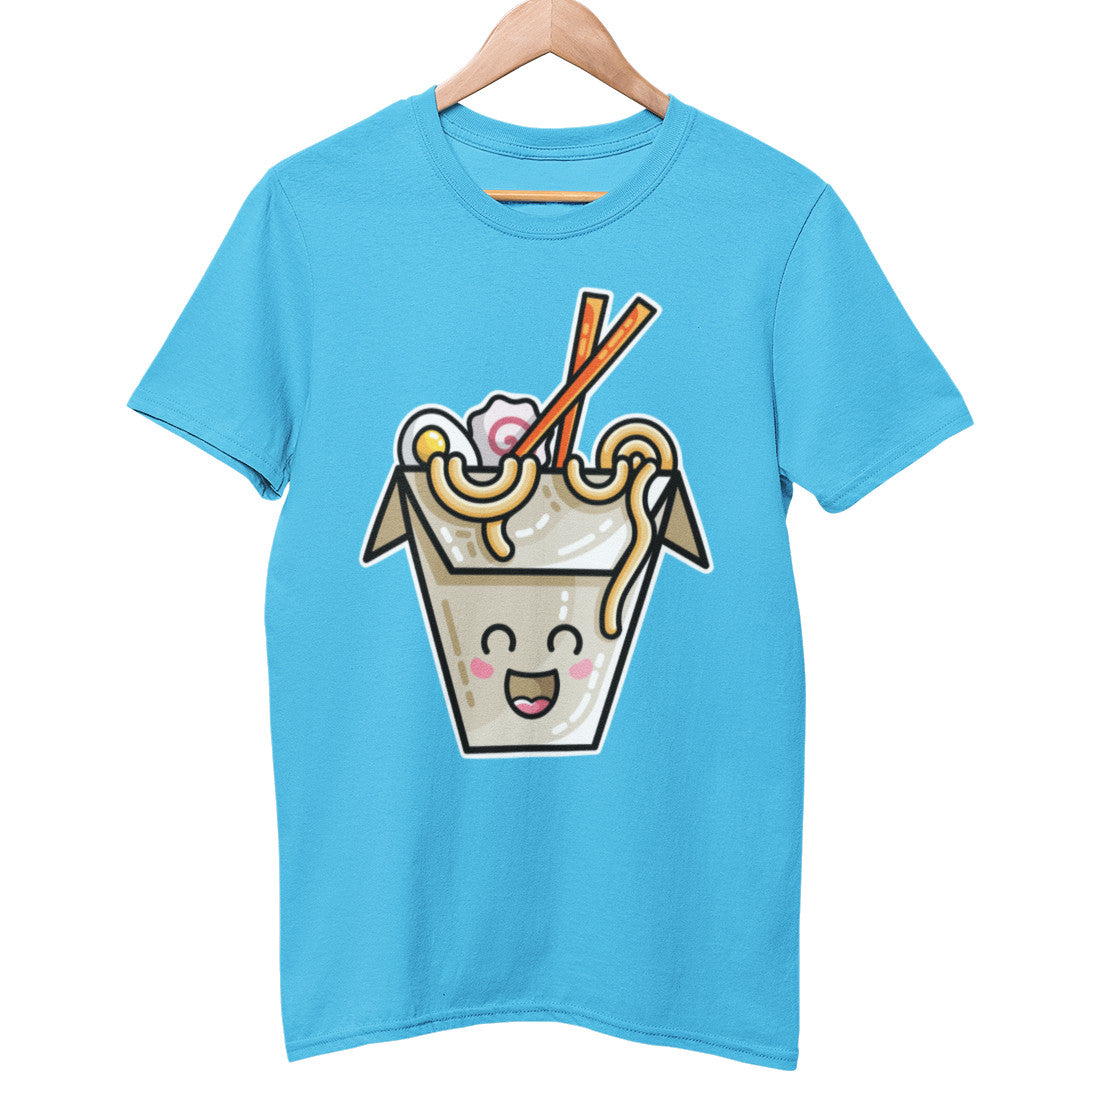 A aqua blue unisex crewneck t-shirt on a wooden hanger with a design on its chest of a kawaii cute takeaway box of ramen noodles with red chopsticks sticking out of the top